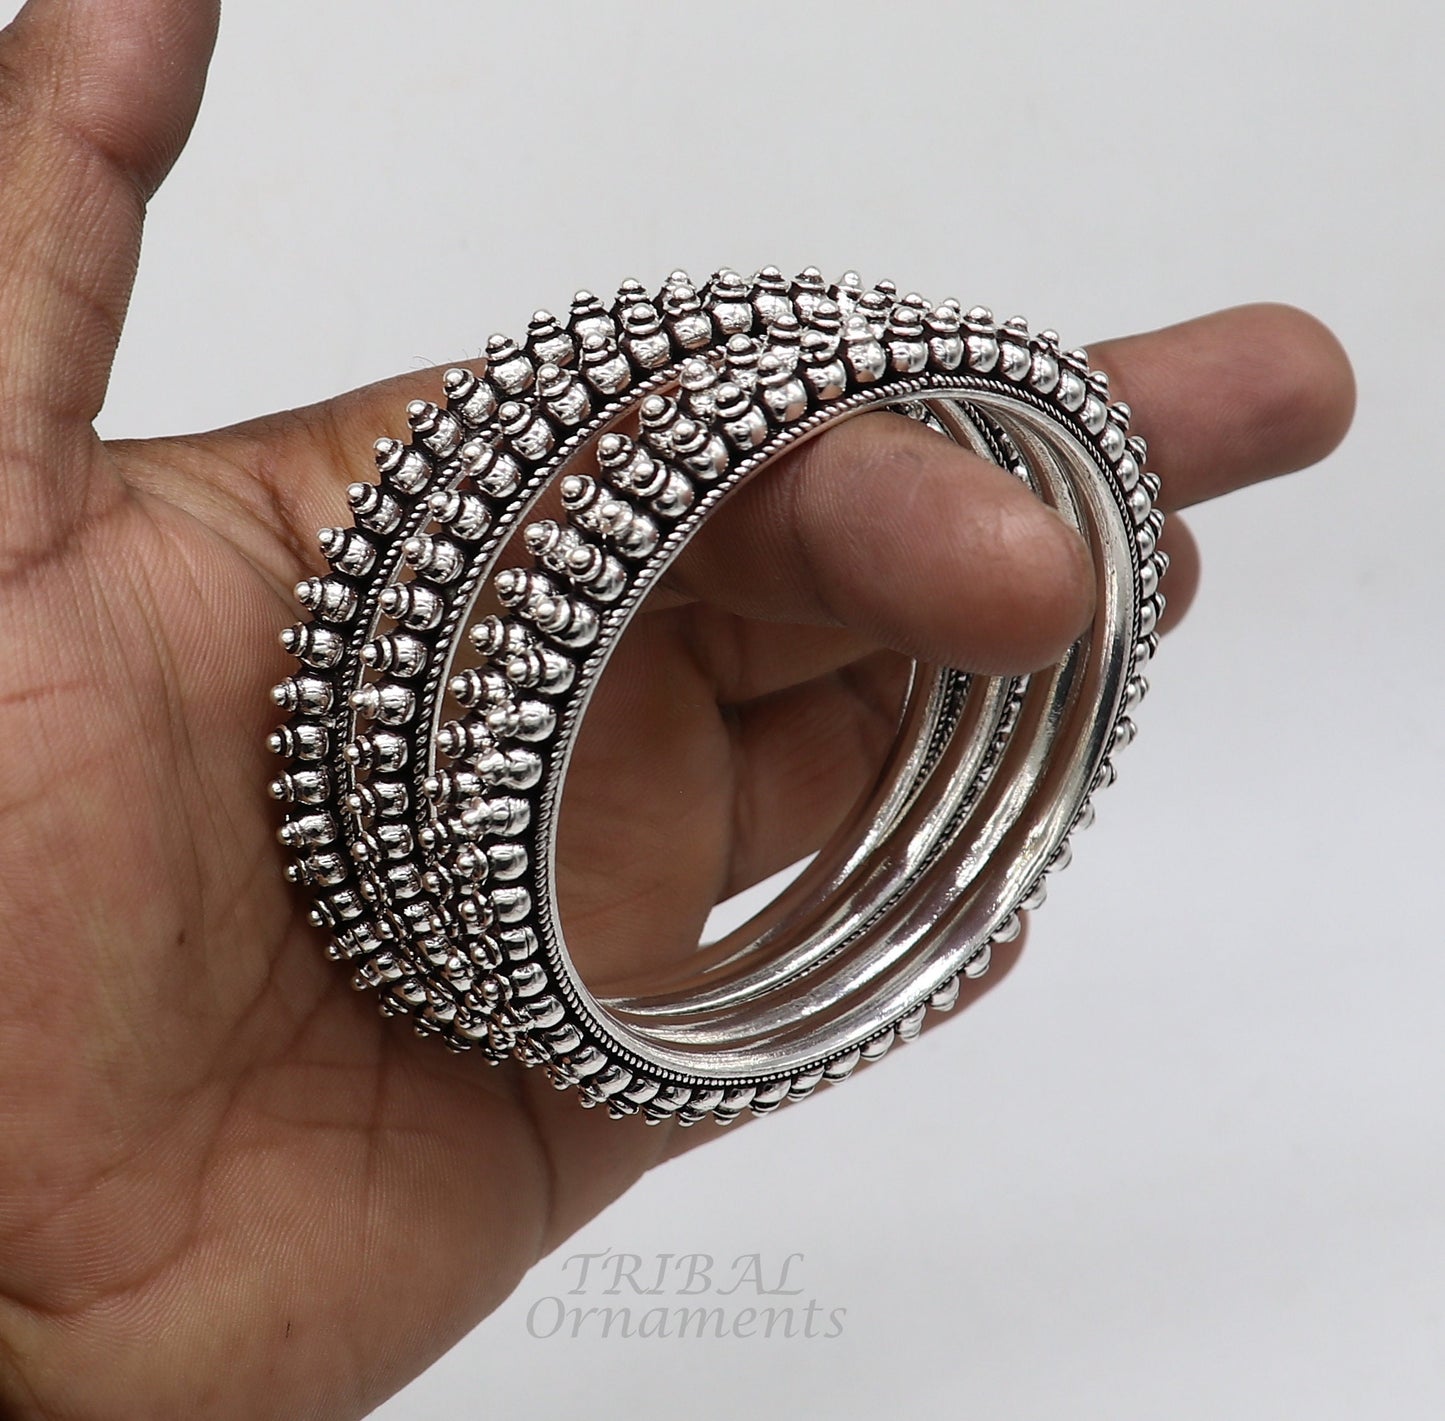 925 sterling silver handmade amazing fashionable cultural bangle bracelet, best brides silver jewelry gifting girl's bangles nba352 - TRIBAL ORNAMENTS